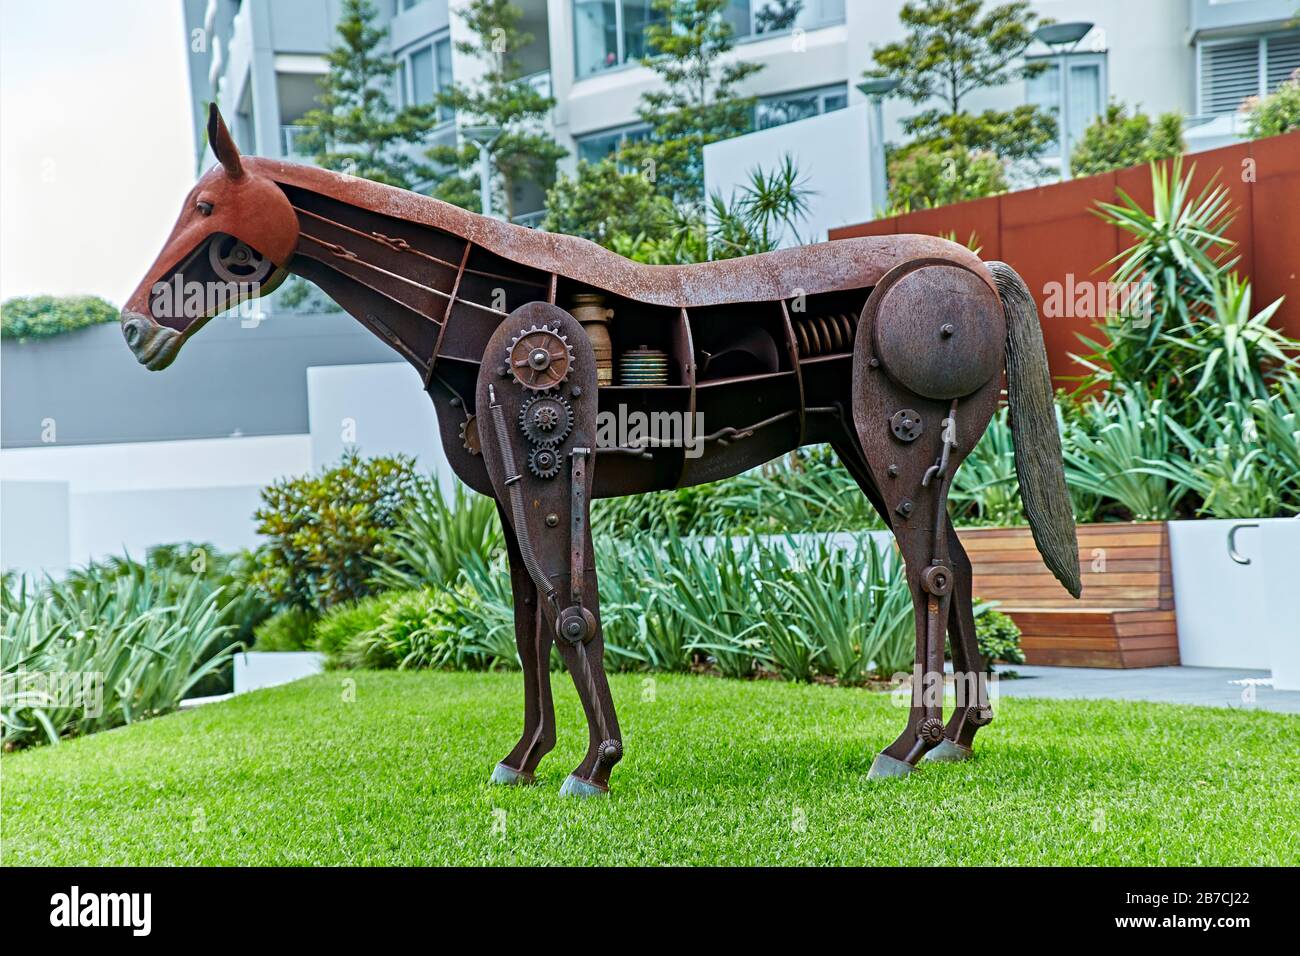 Mechanical Horse Steel Sculpture an artwork of steel and recycled parts. Located in Chatswood Sydney Australia. Stock Photo